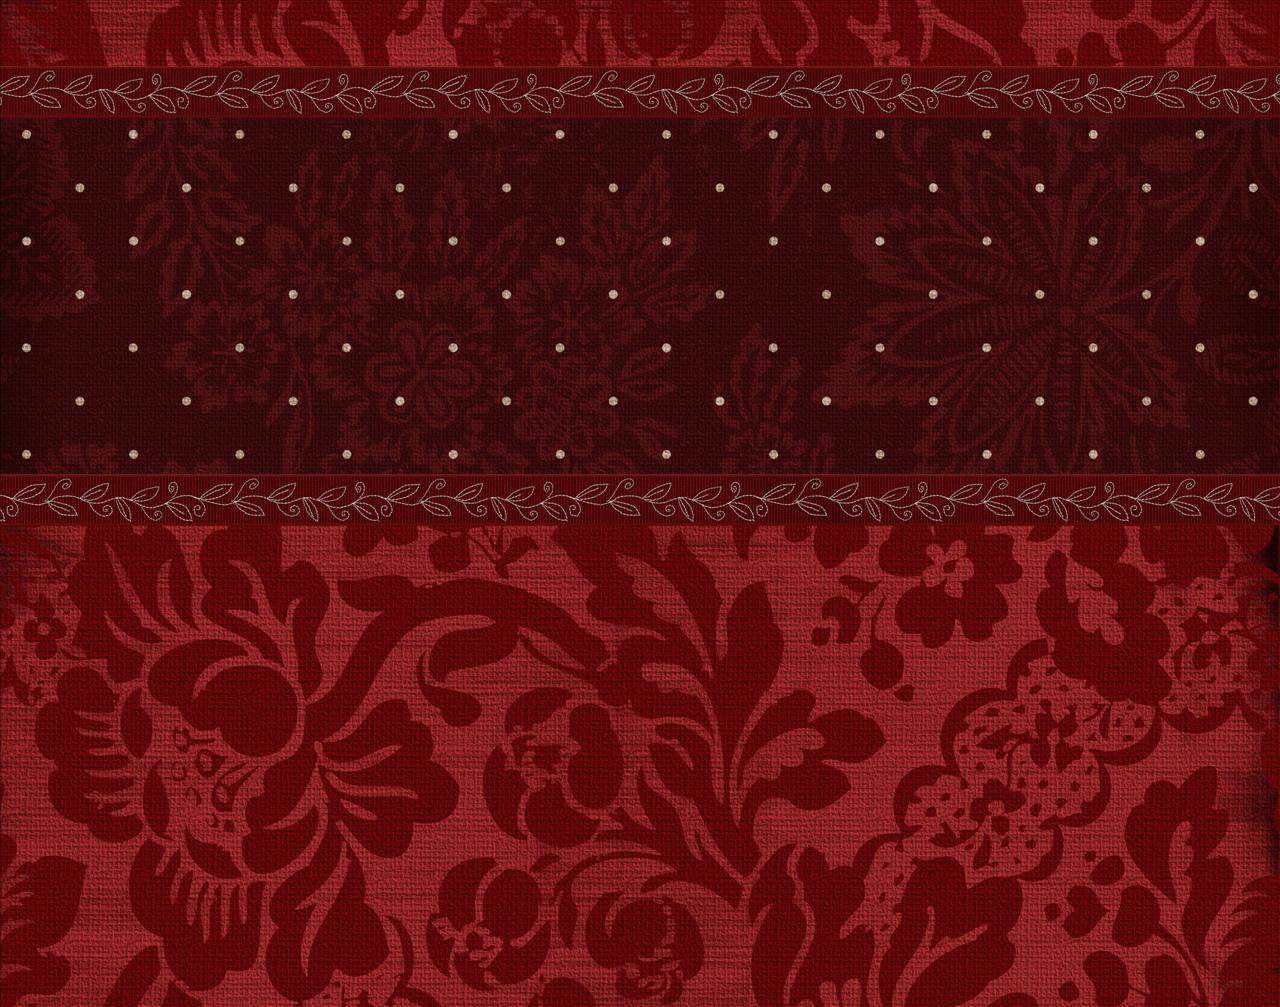 Rich Reds - About Time Backgrounds powerpoint backgrounds